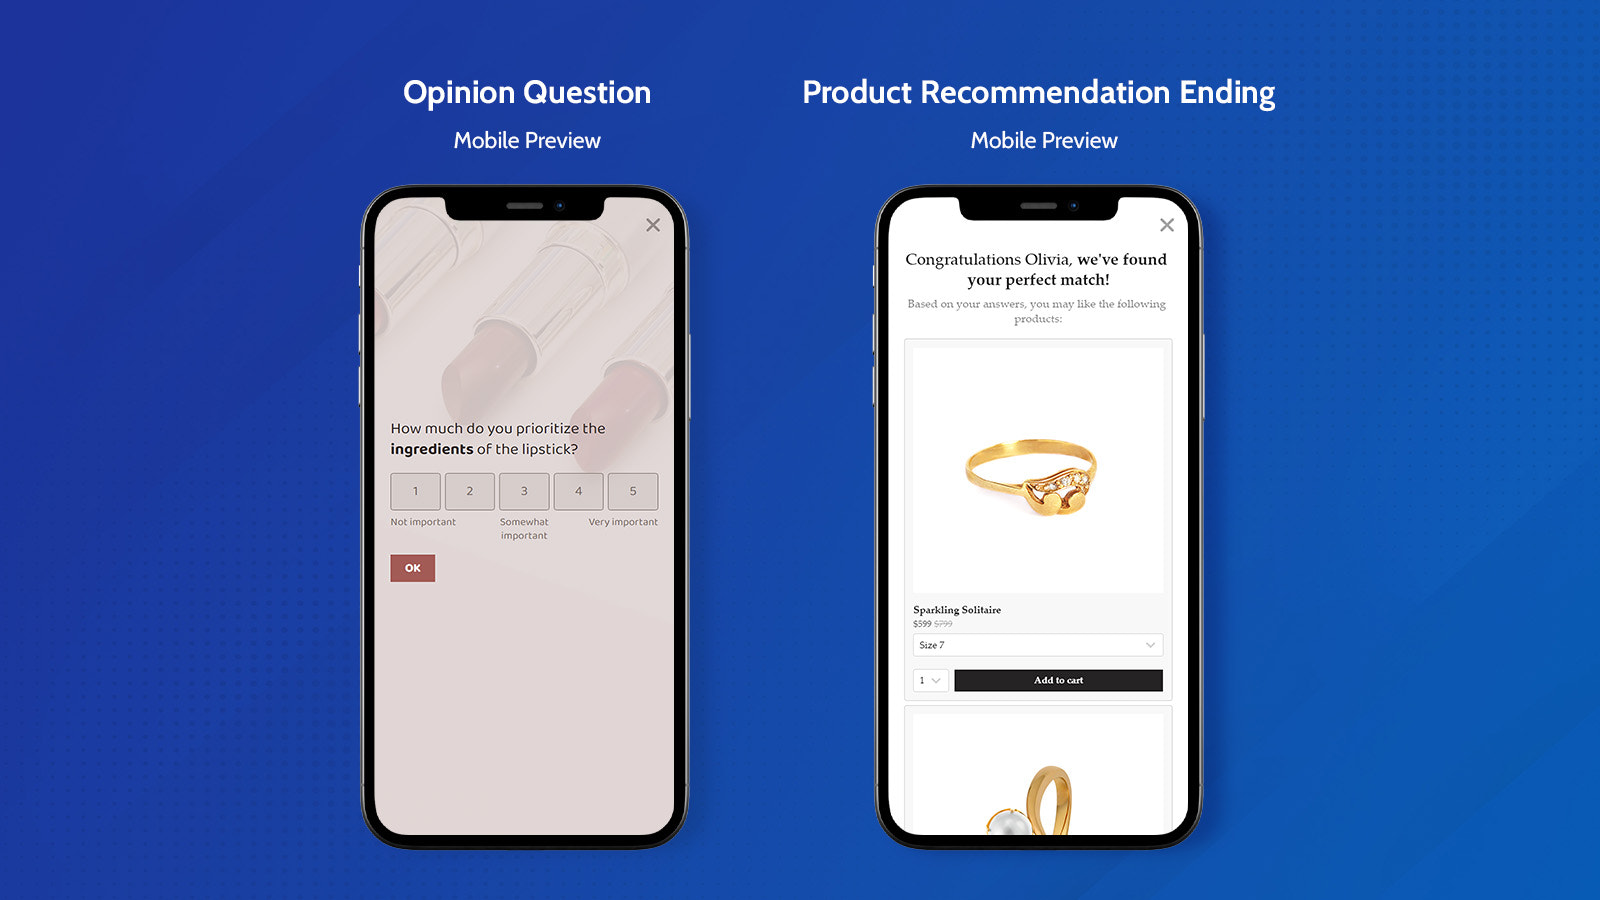 Mobile preview of an opinion and product recommendation ending